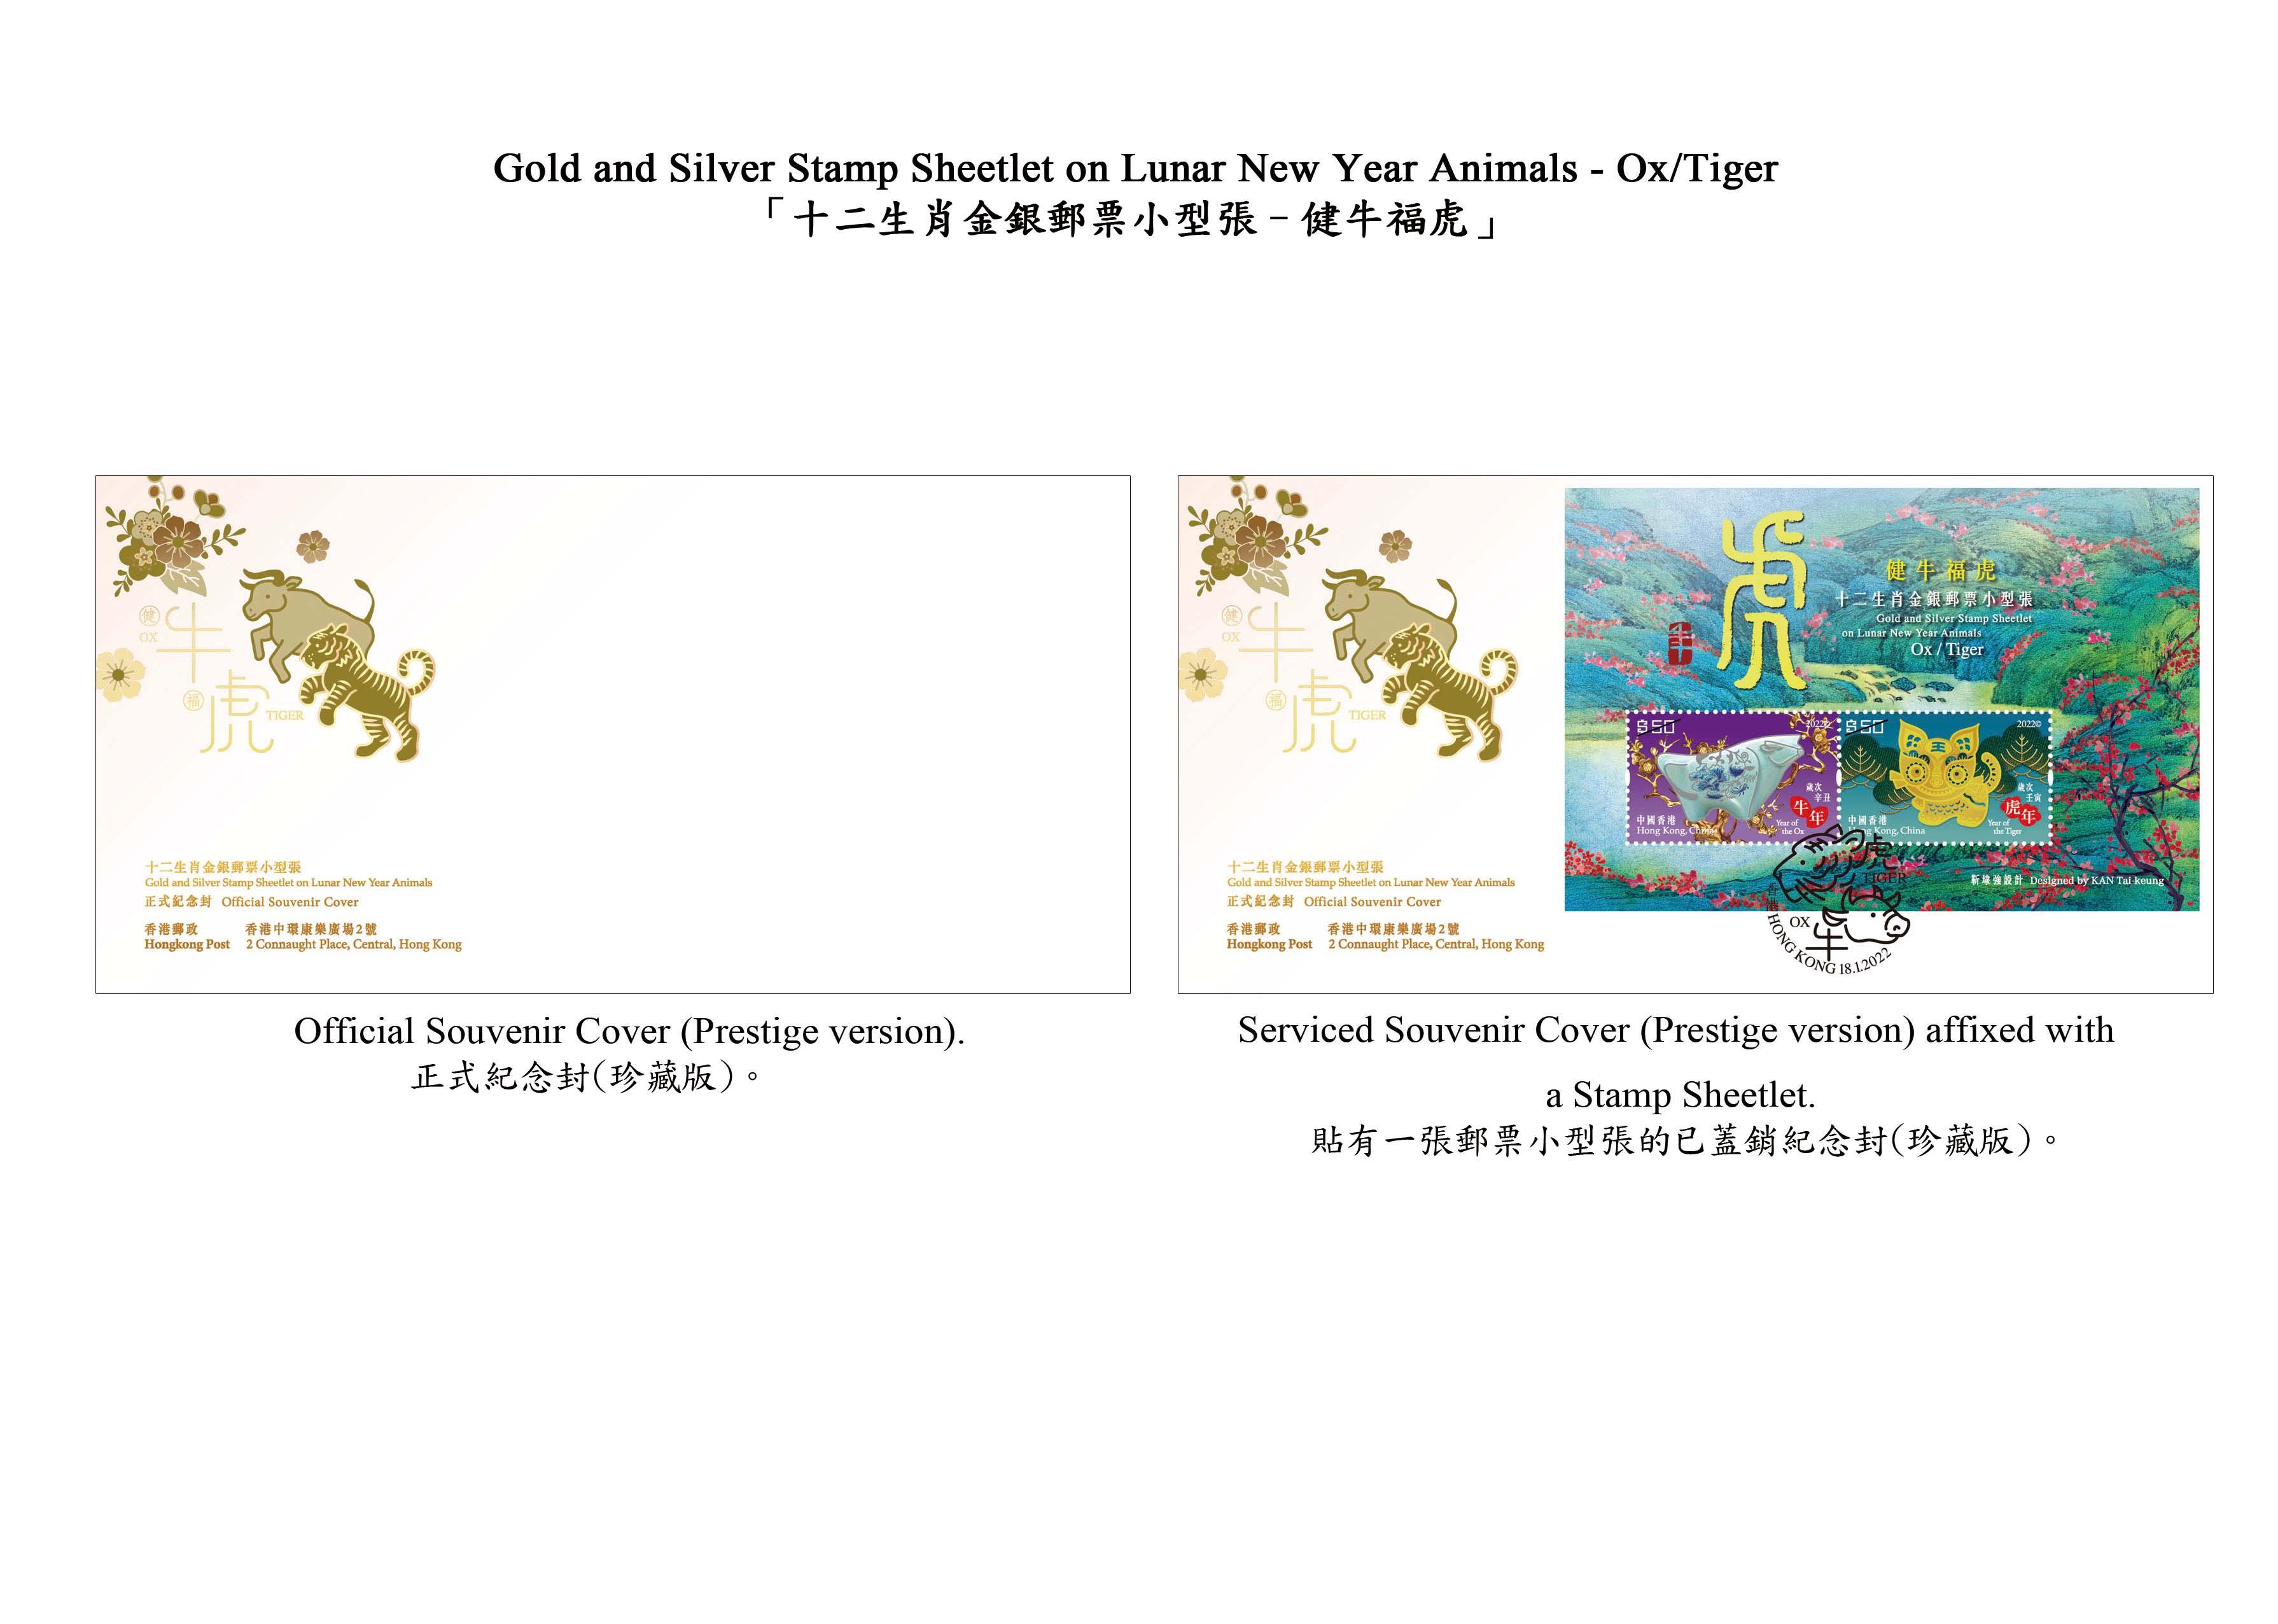 Hongkong Post will launch a special stamp issue and associated philatelic products with the theme "Year of the Tiger" on January 18 (Tuesday). The "Gold and Silver Stamp Sheetlet on Lunar New Year Animals - Ox/Tiger" will also be launched on the same day. Photo shows the prestige souvenir covers.


